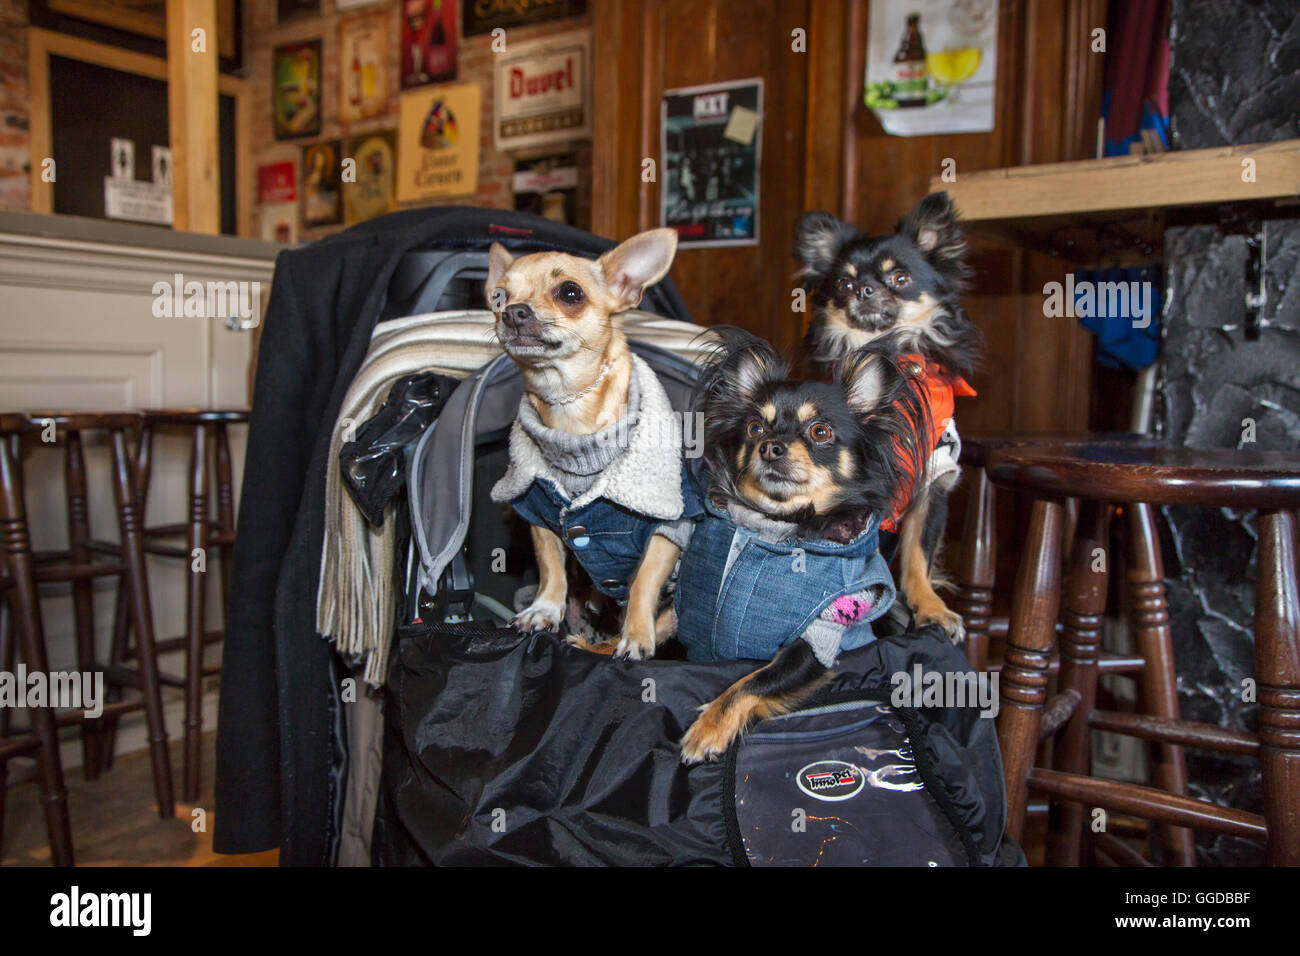 Three cute Chihuahuas in bag wearing dog clothes in pub Stock Photo